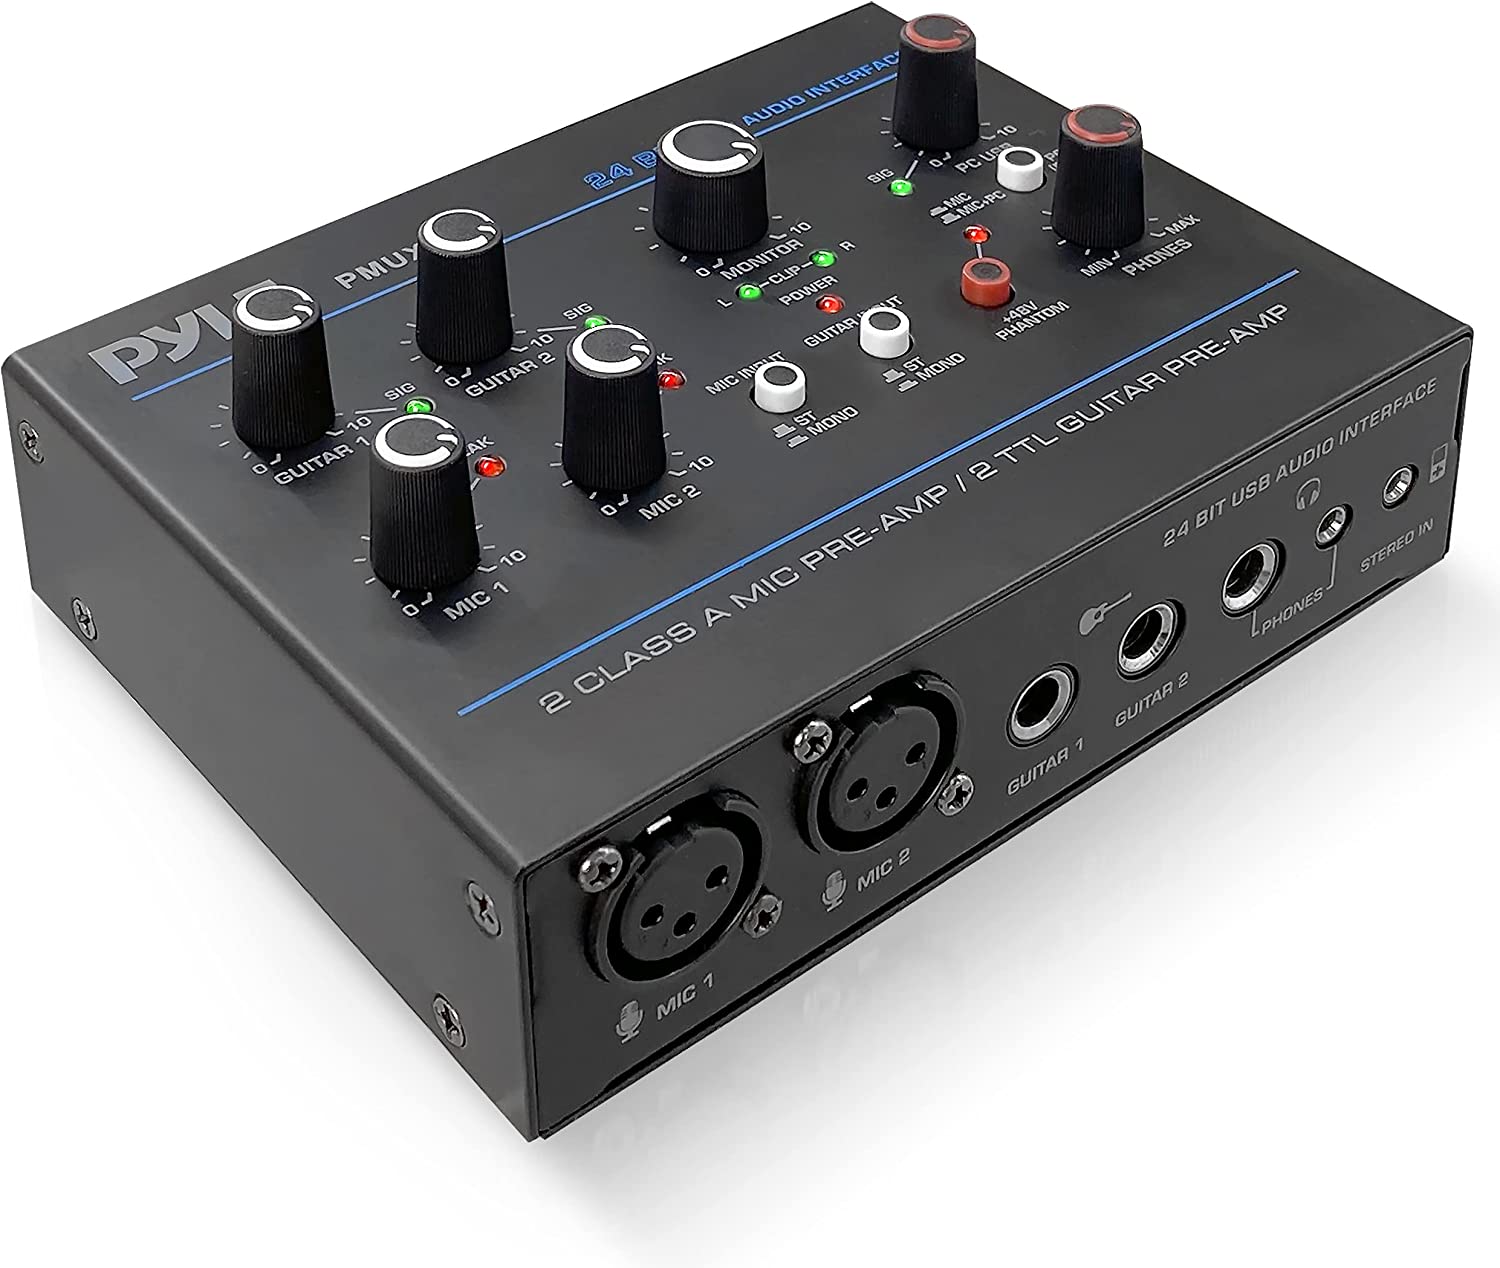 Pyle Professional USB Audio Interface with MIC, Guitar, AUX Stereo Inputs,  Phone/Monitor Outputs, Ideal for Computer Playing & Recording, Compact